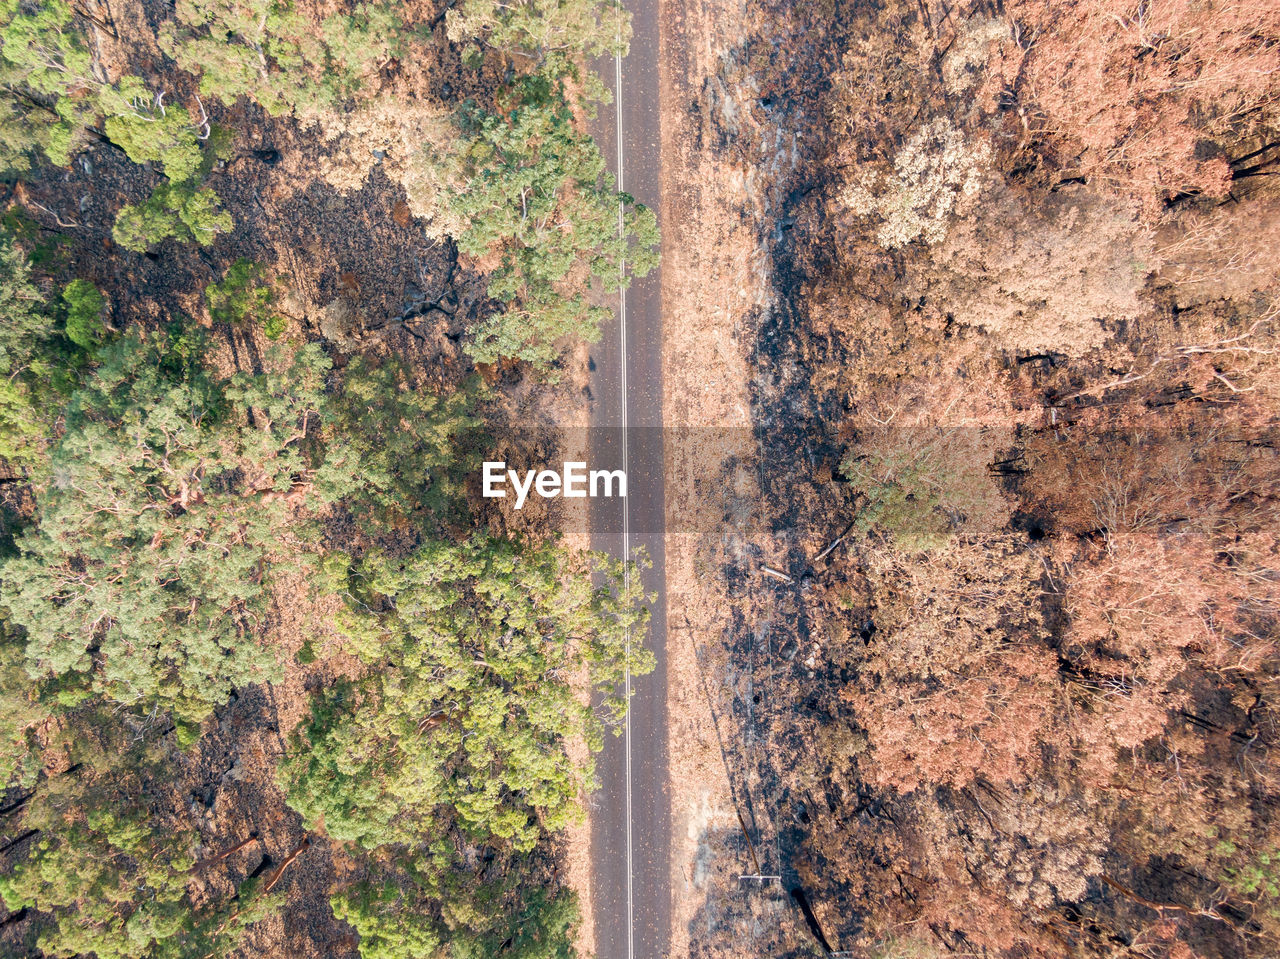 Bird's eye view of a country road near sydney, leading through burnt forest after bushfires in 2019.